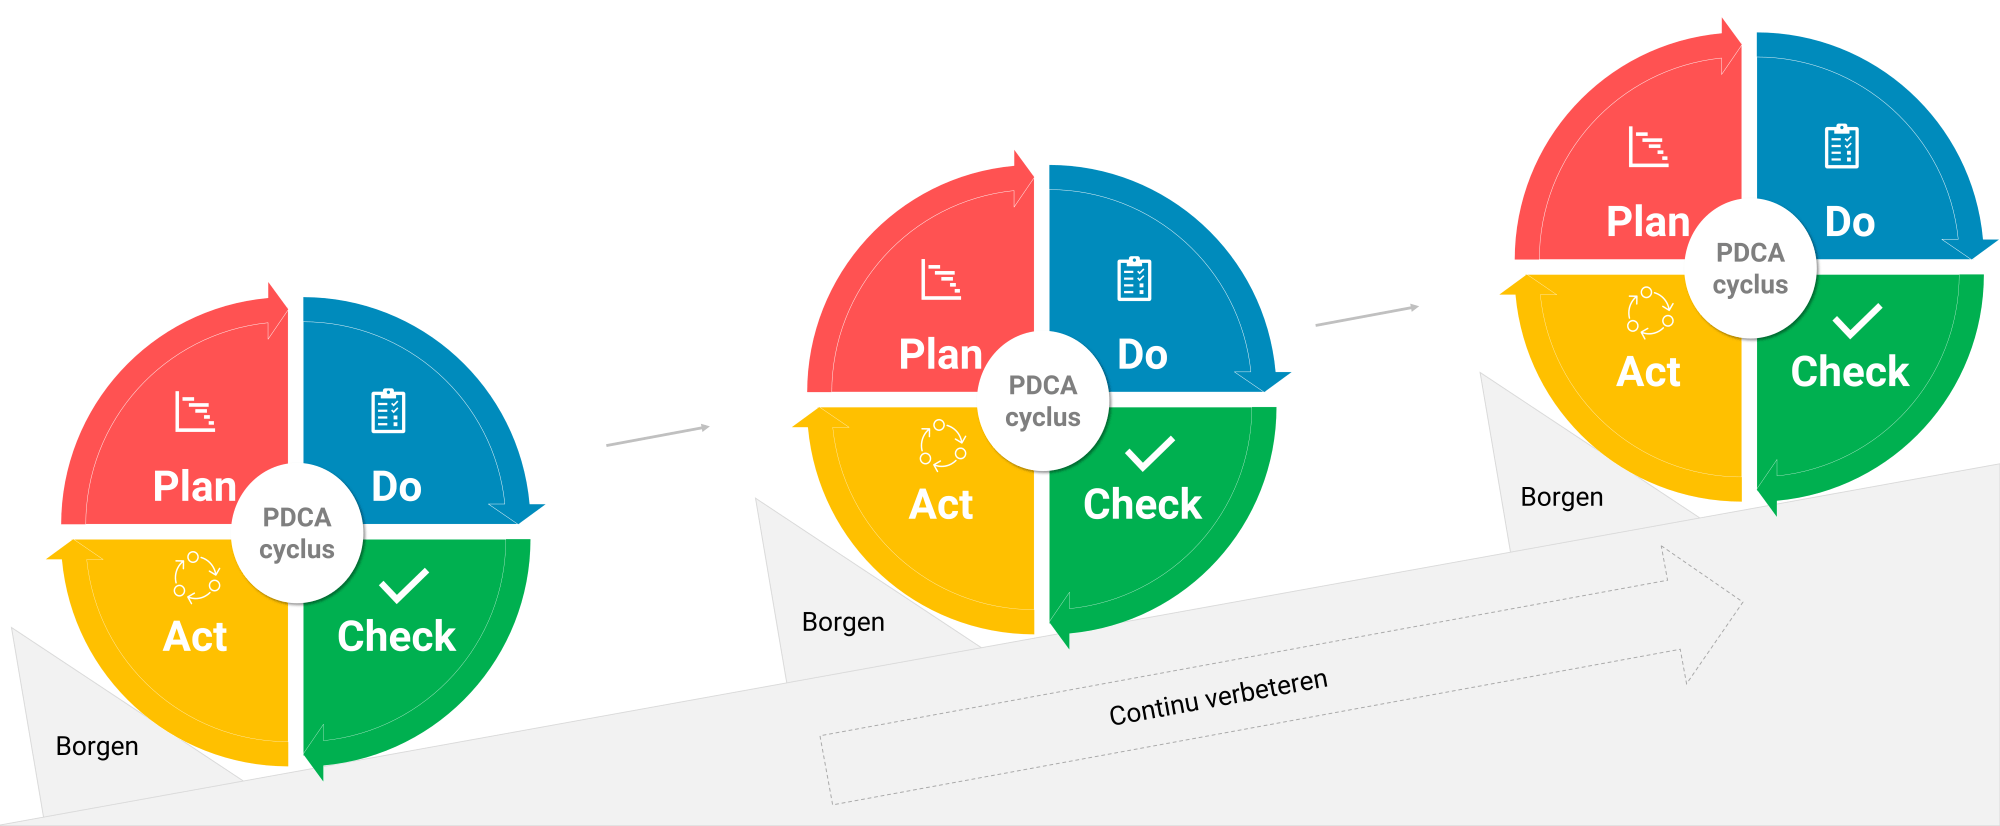 Using PDCA cycle for continuous improvement